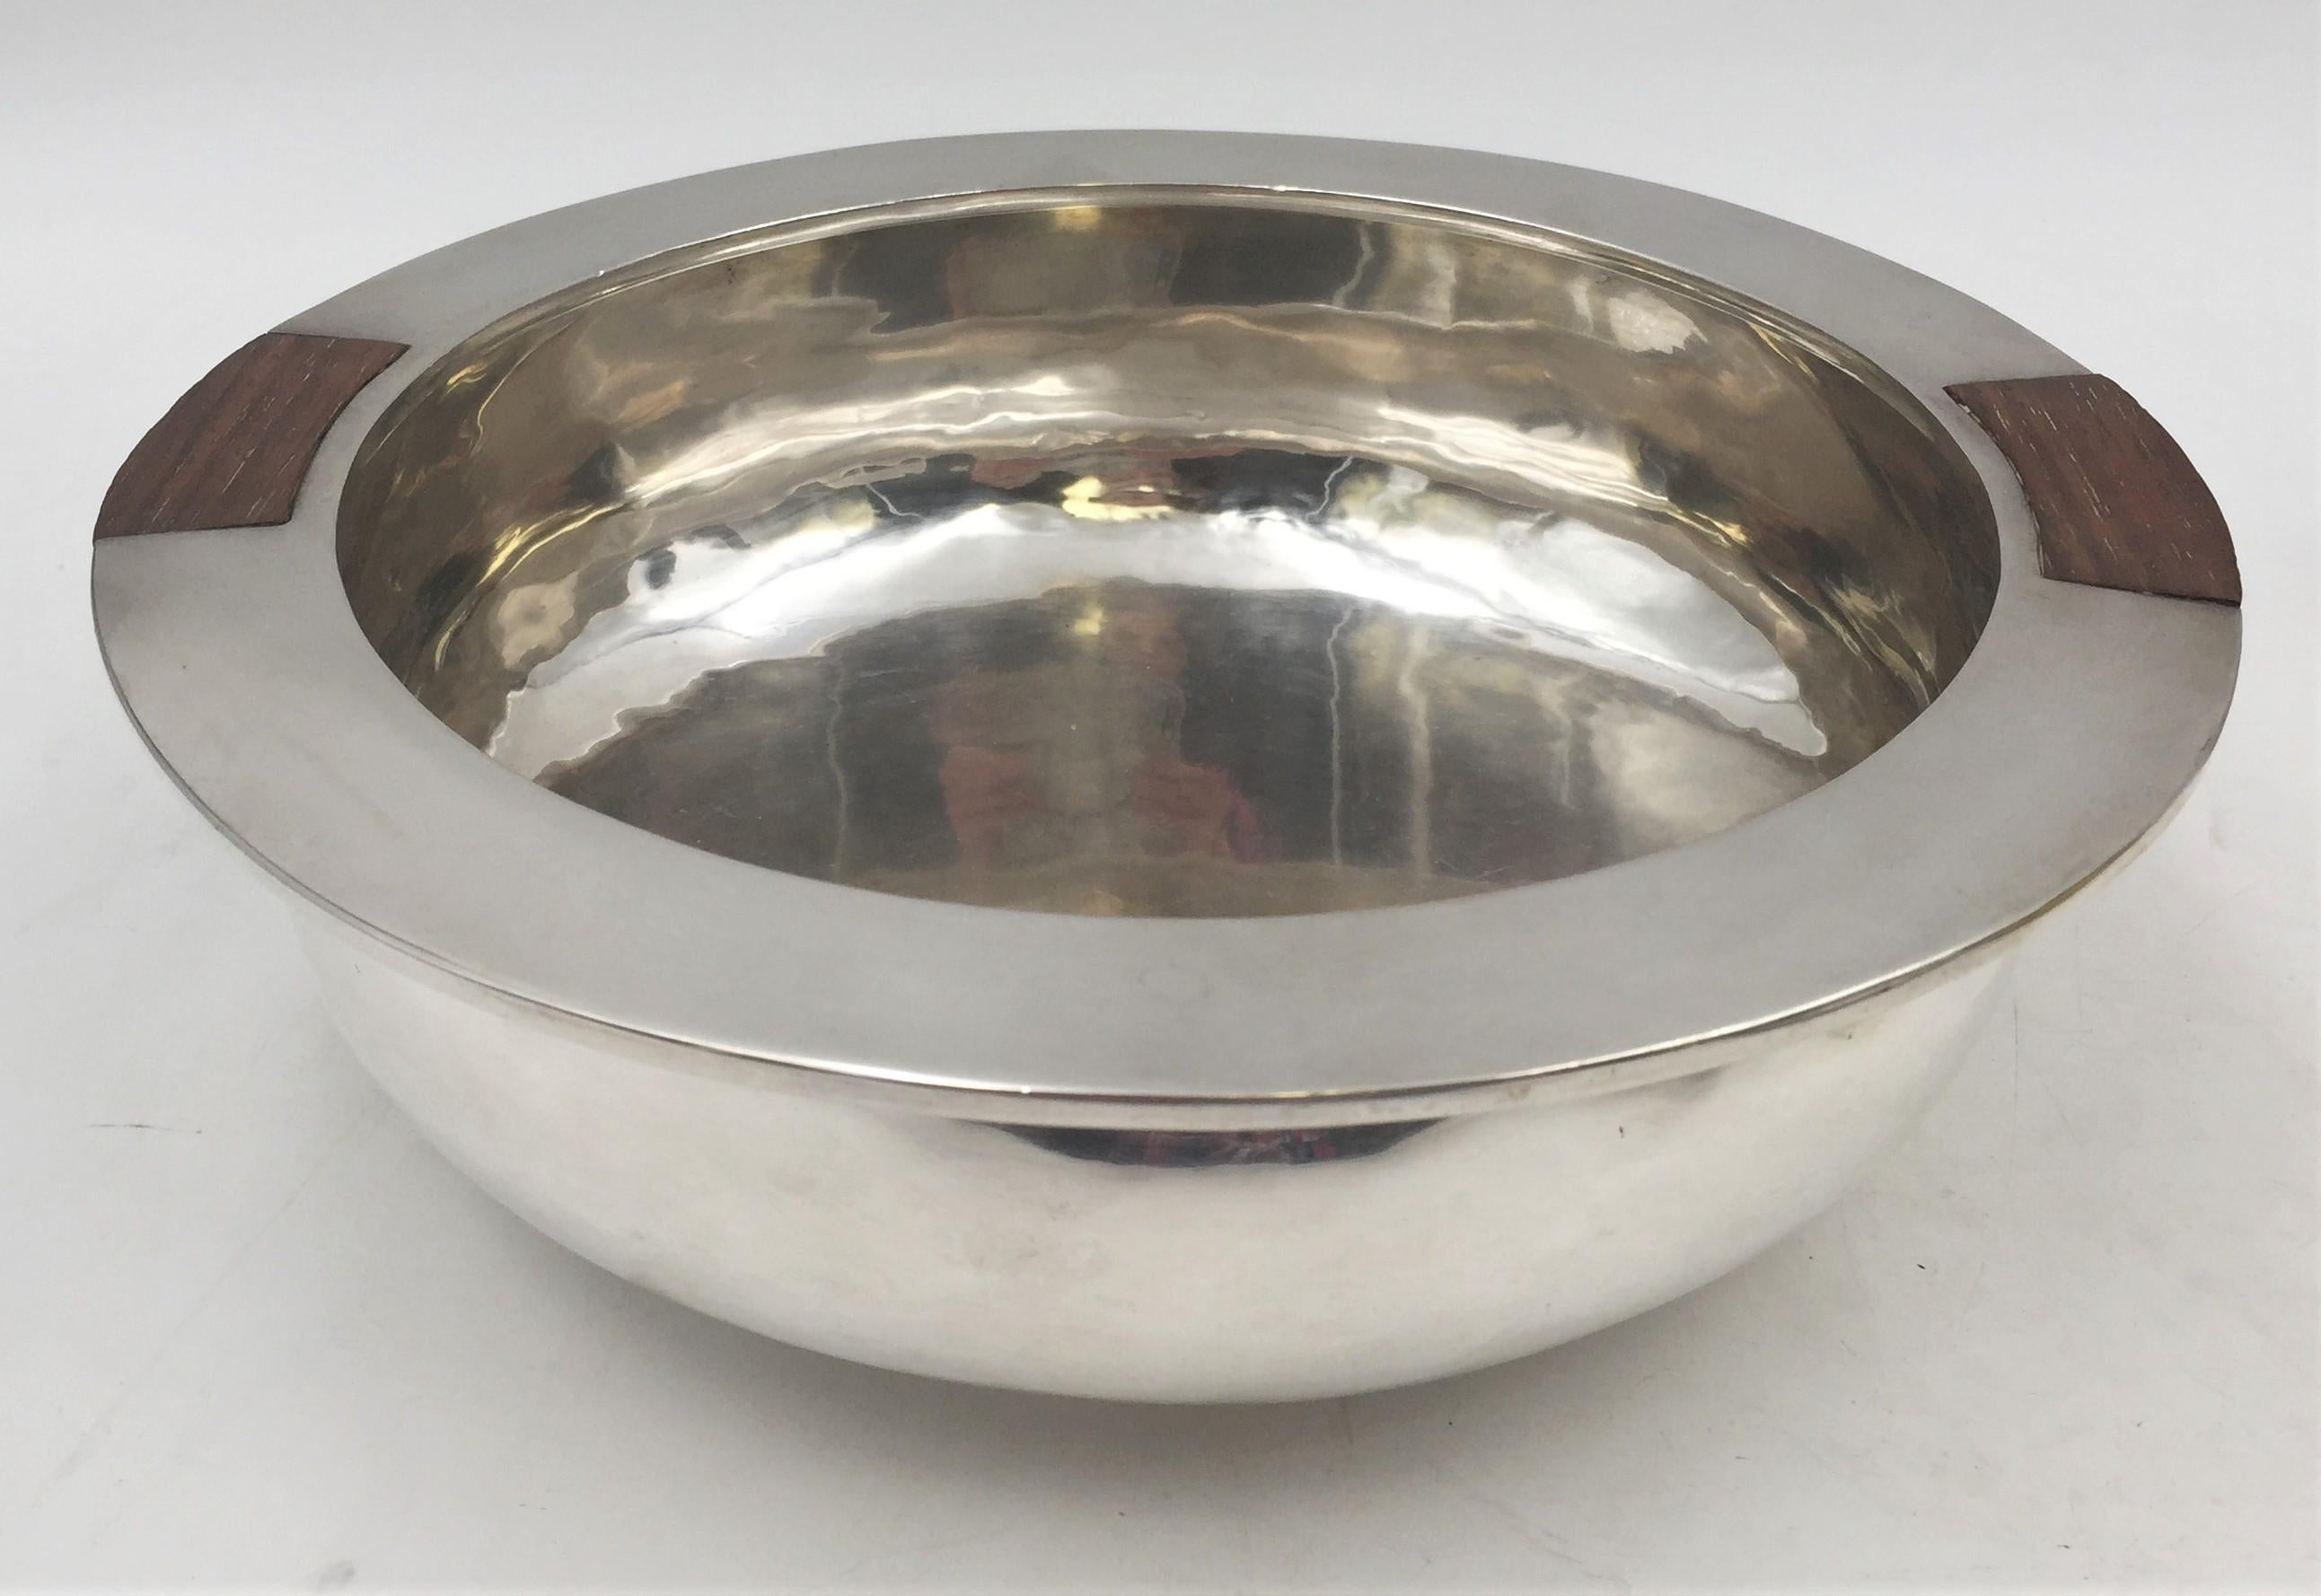 American, 20th century, handmade, sterling silver and wood bowl / ice bucket in Mid-Century Modern style with exquisite geometric design. It measures 8 3/4'' in diameter by 3'' in height, weighs 25 ozt, and bears hallmarks as shown.

 